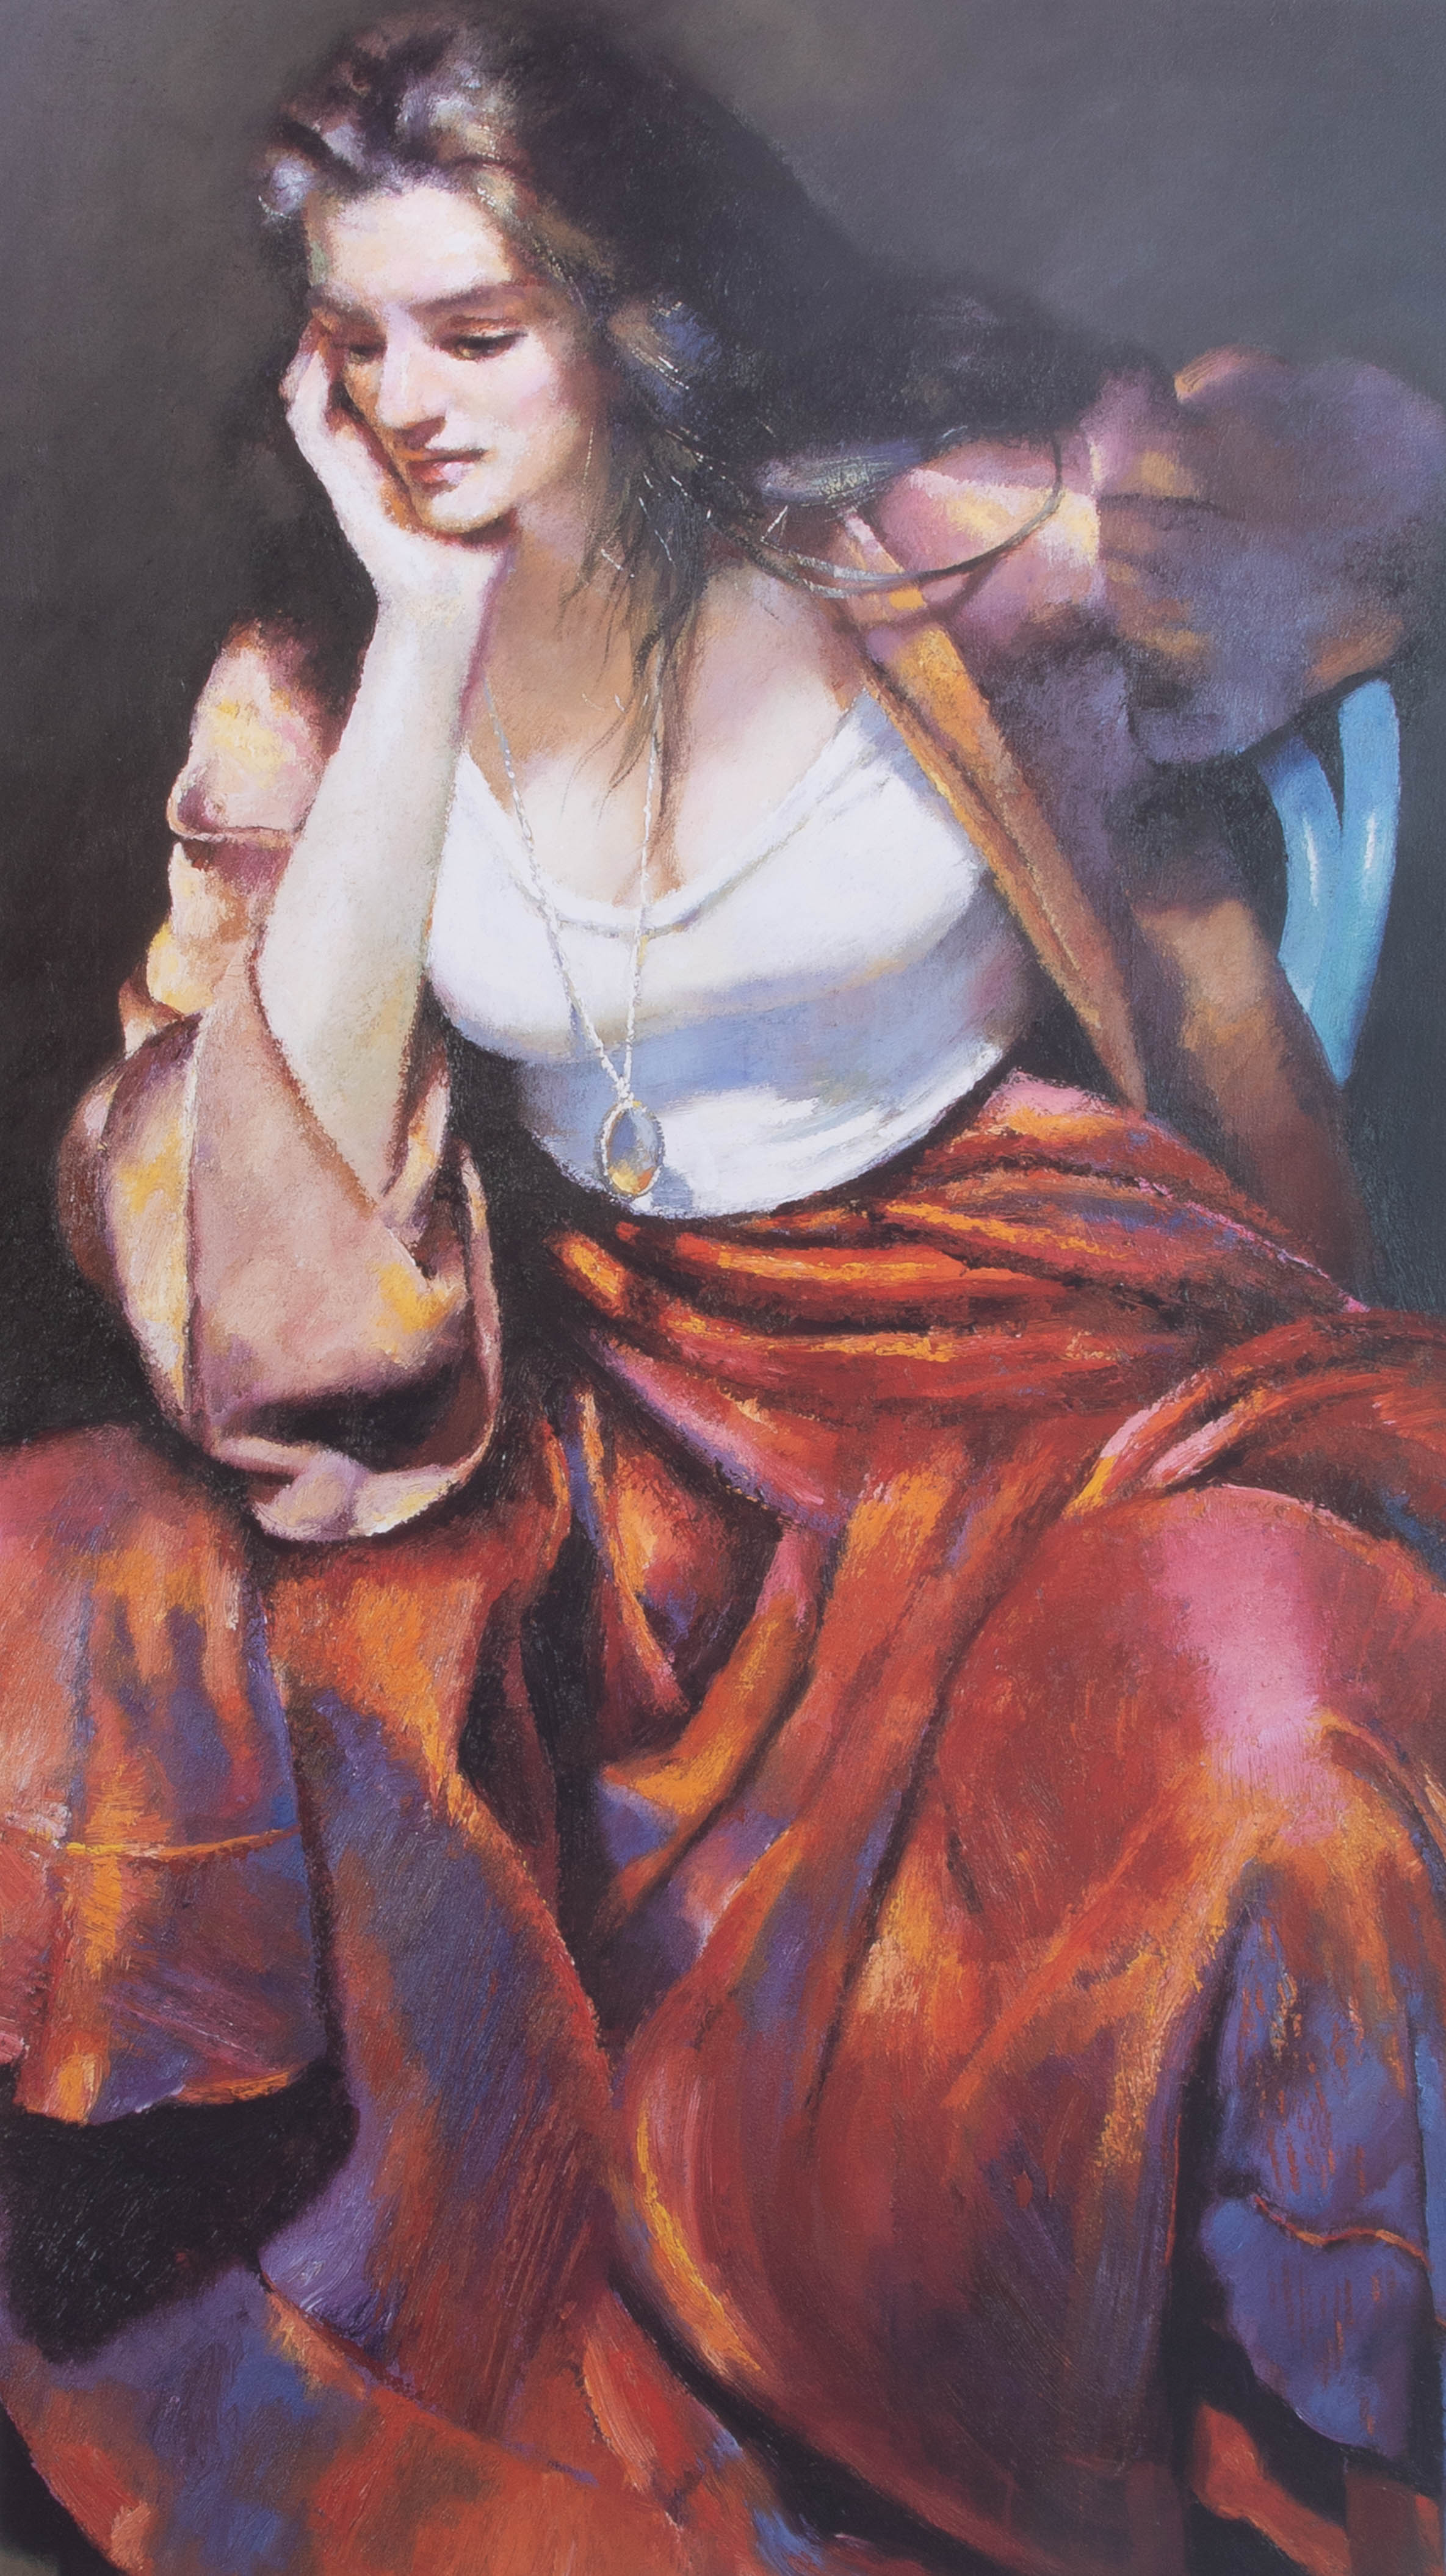 Robert Lenkiewicz, 'Esther Silver Locket', signed limited edition print 281/500, 60cm x 35cm, - Image 2 of 2